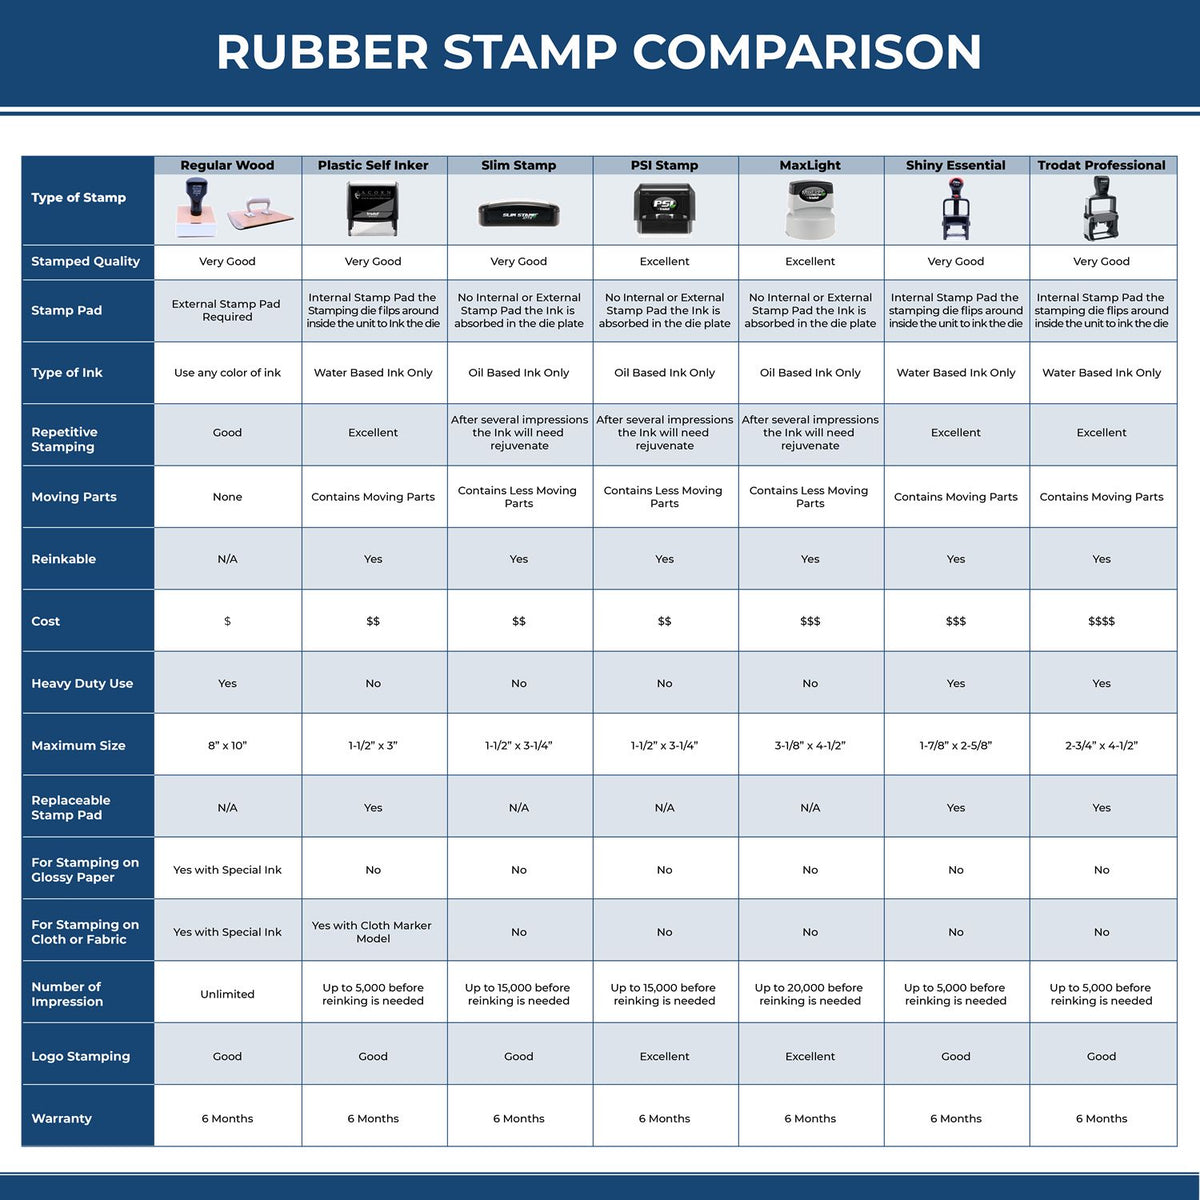 Large Your Insurance has Paid their Portion Rubber Stamp 4980R Rubber Stamp Comparison